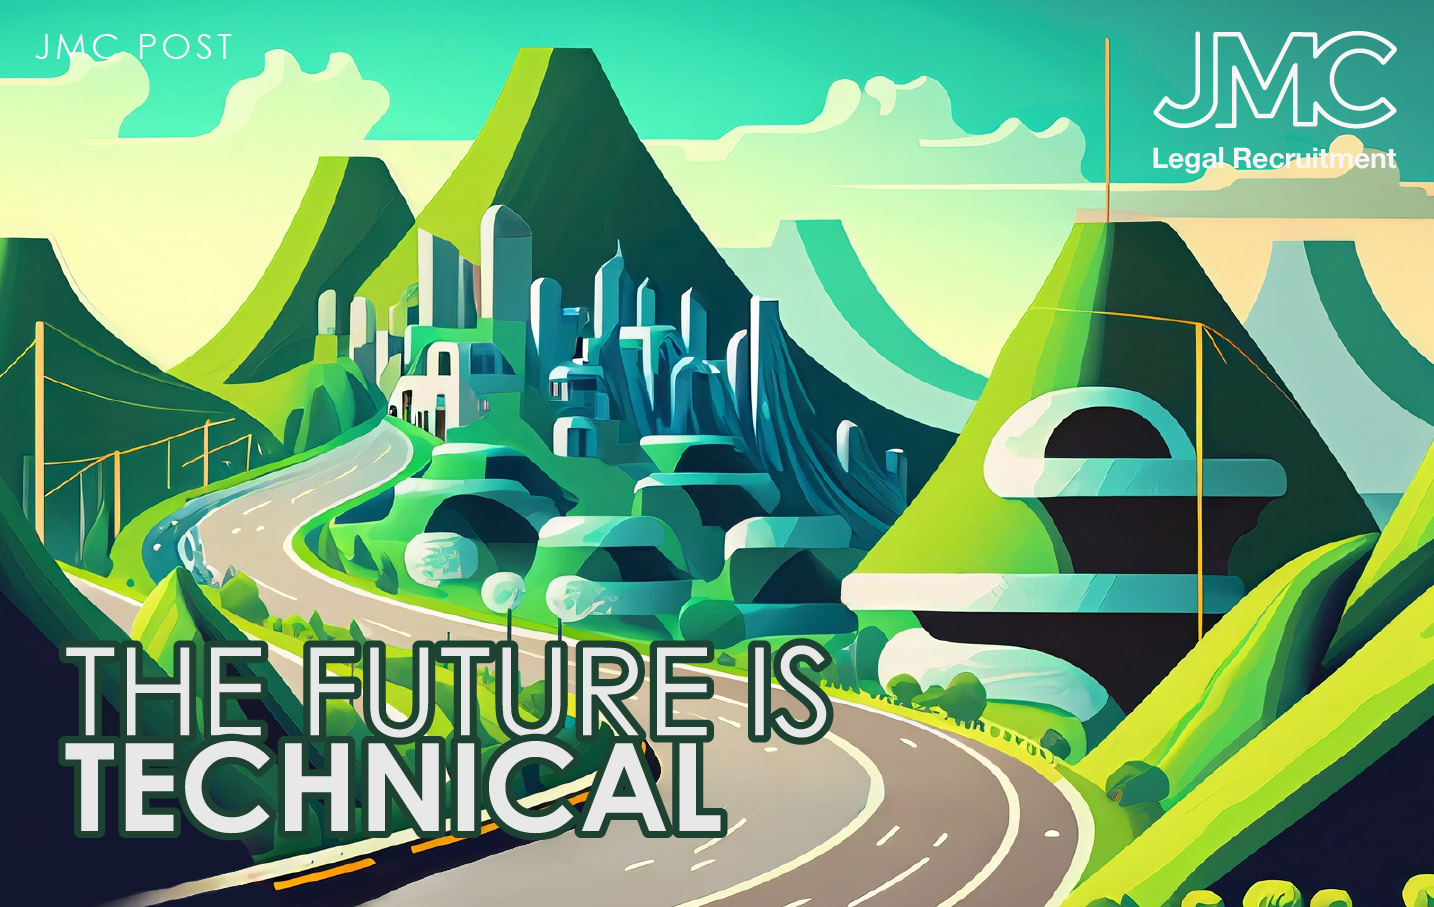 The Future is Technical